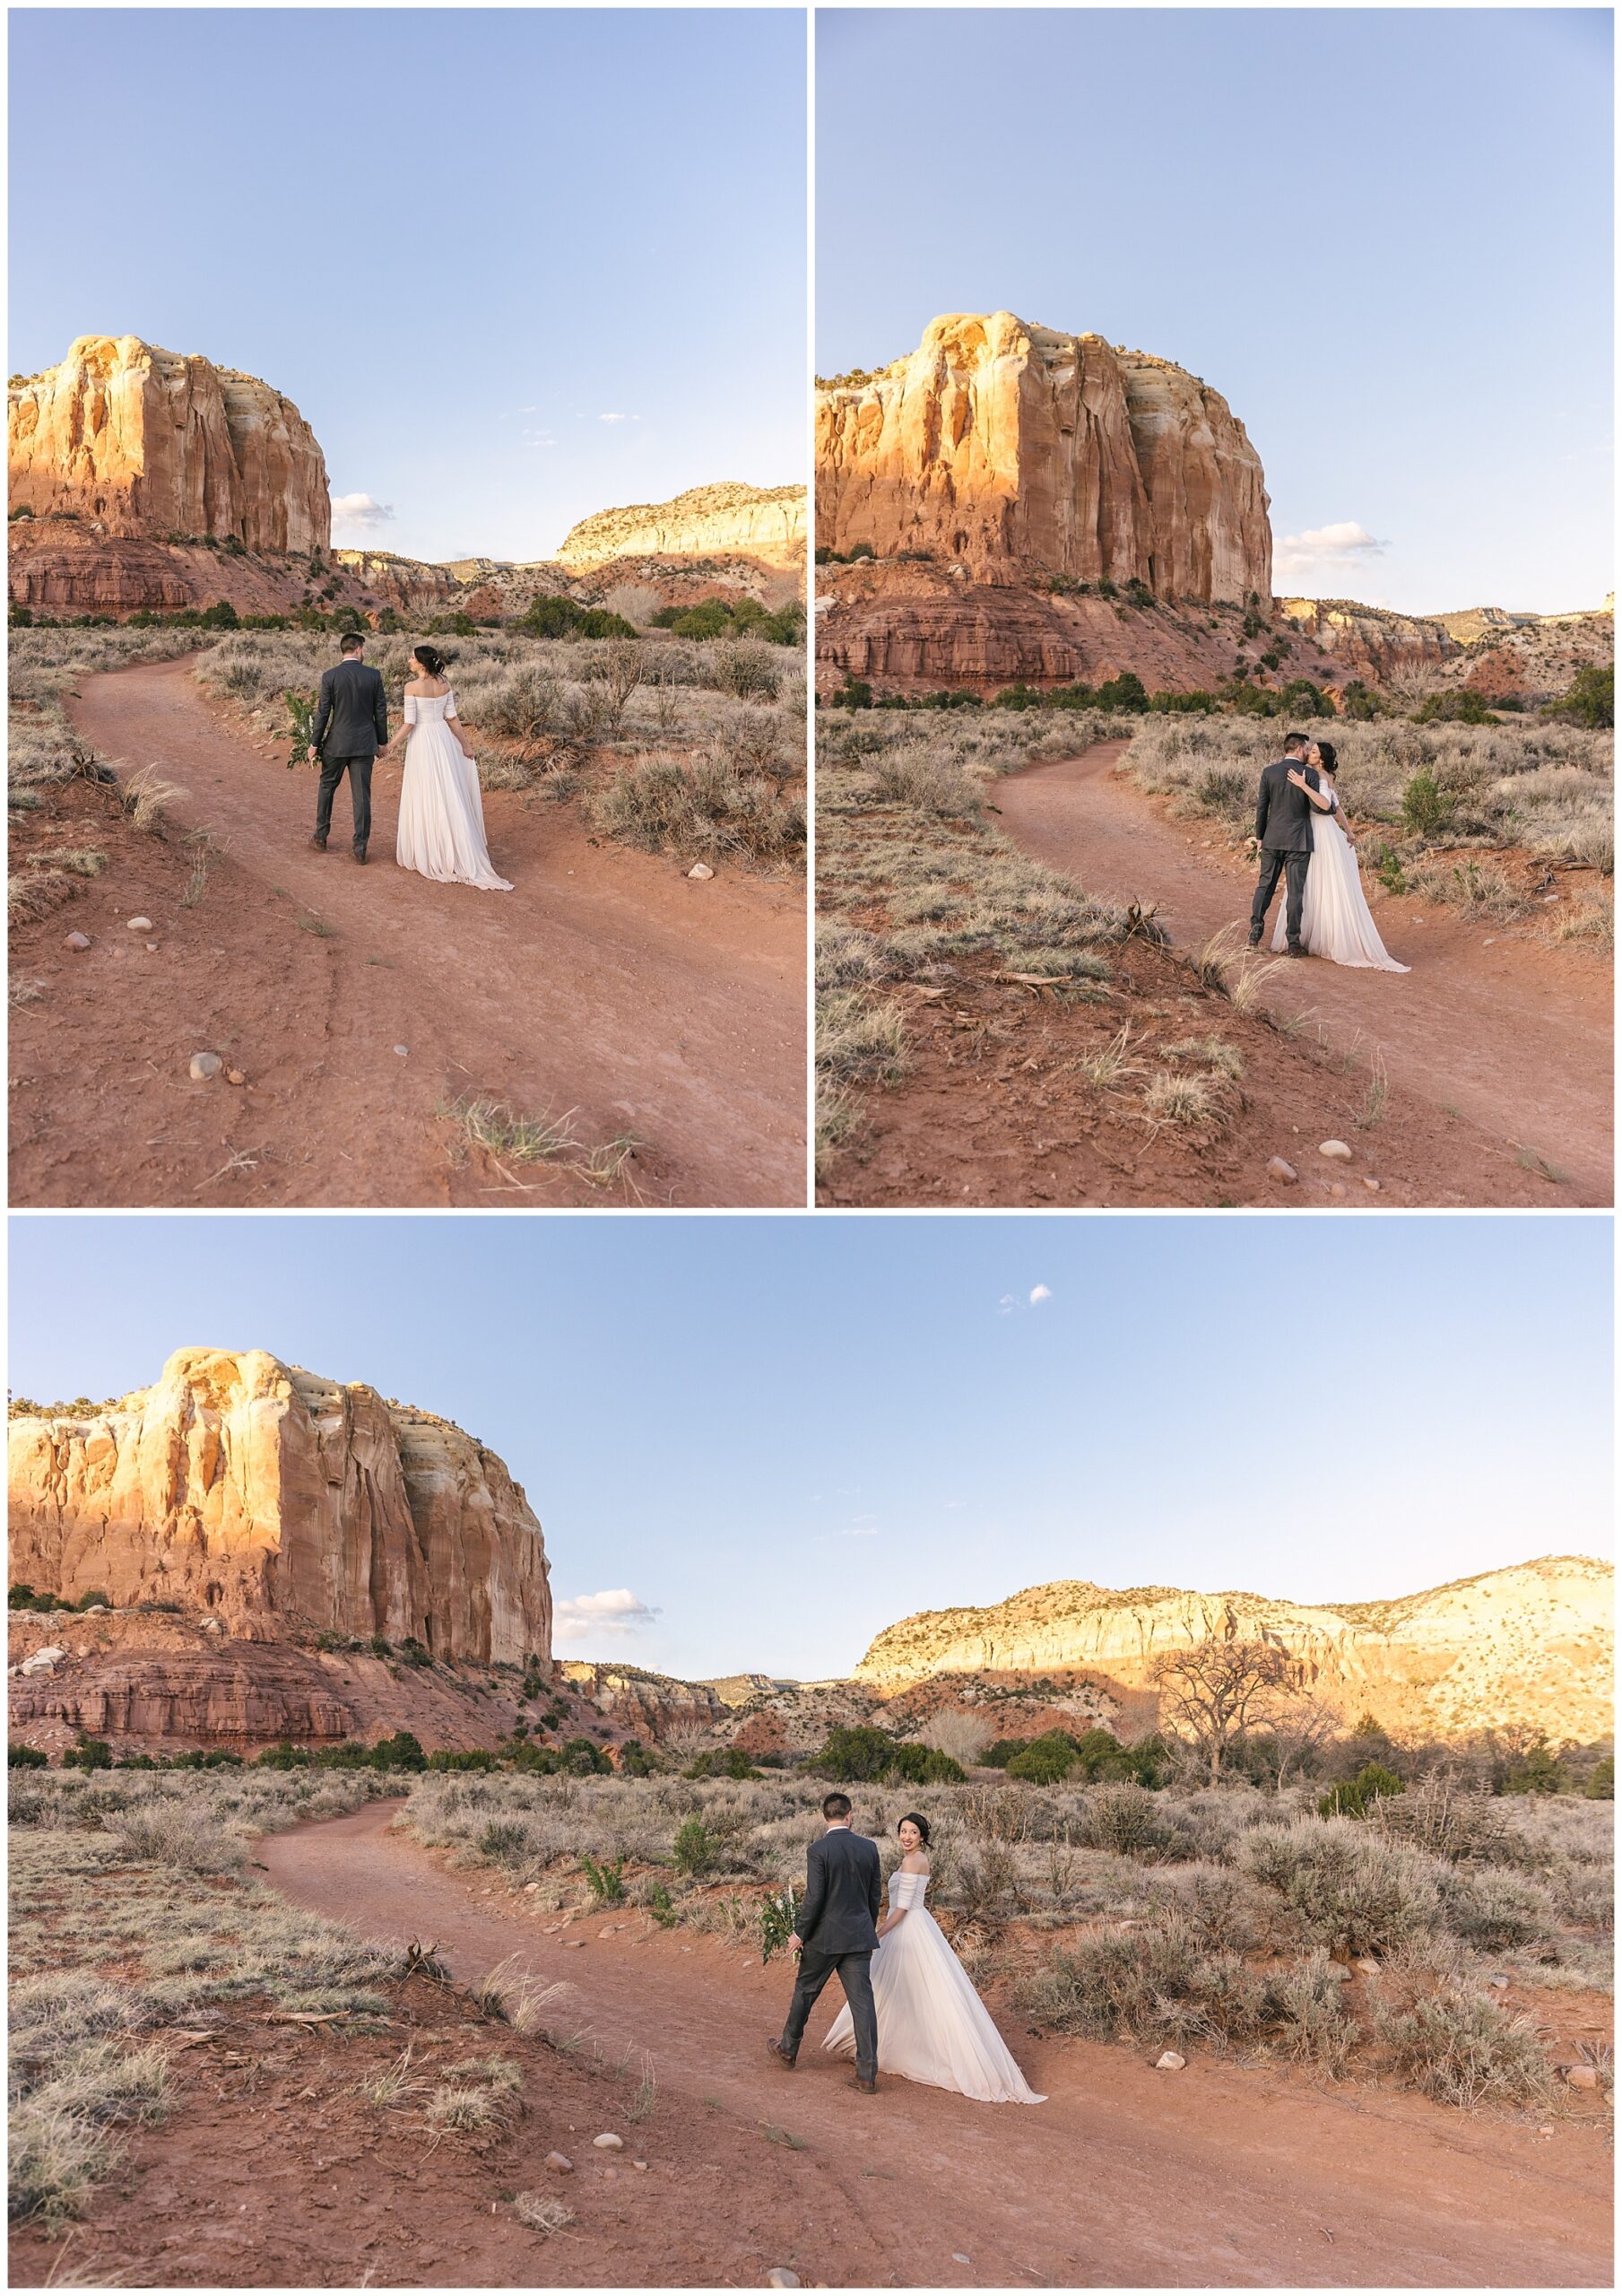 bride and groom walking on trail at sunset at Georgia O'Keeffe's Ghost Ranch wedding venue